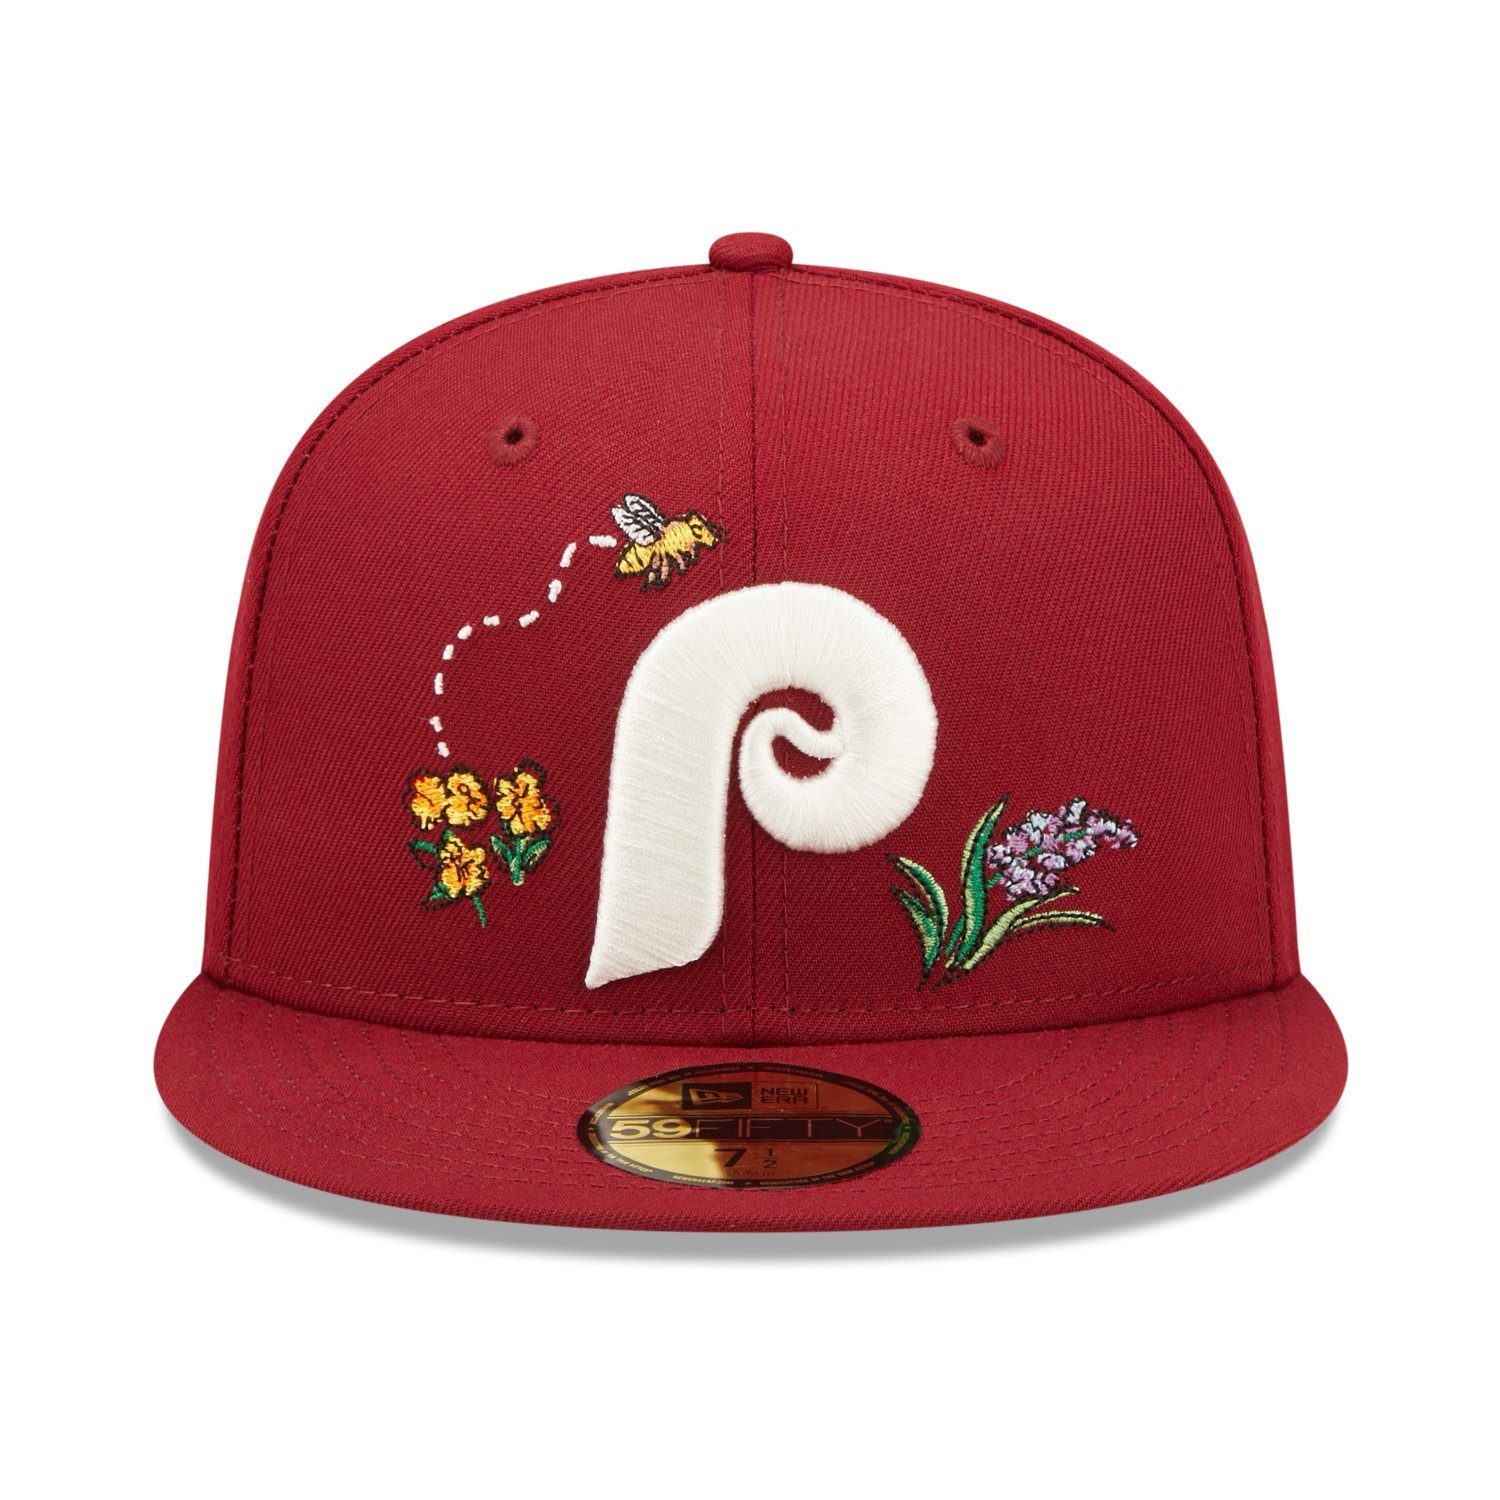 WATER Phillies New Fitted Philadelphia Era Cap FLORAL 59Fifty